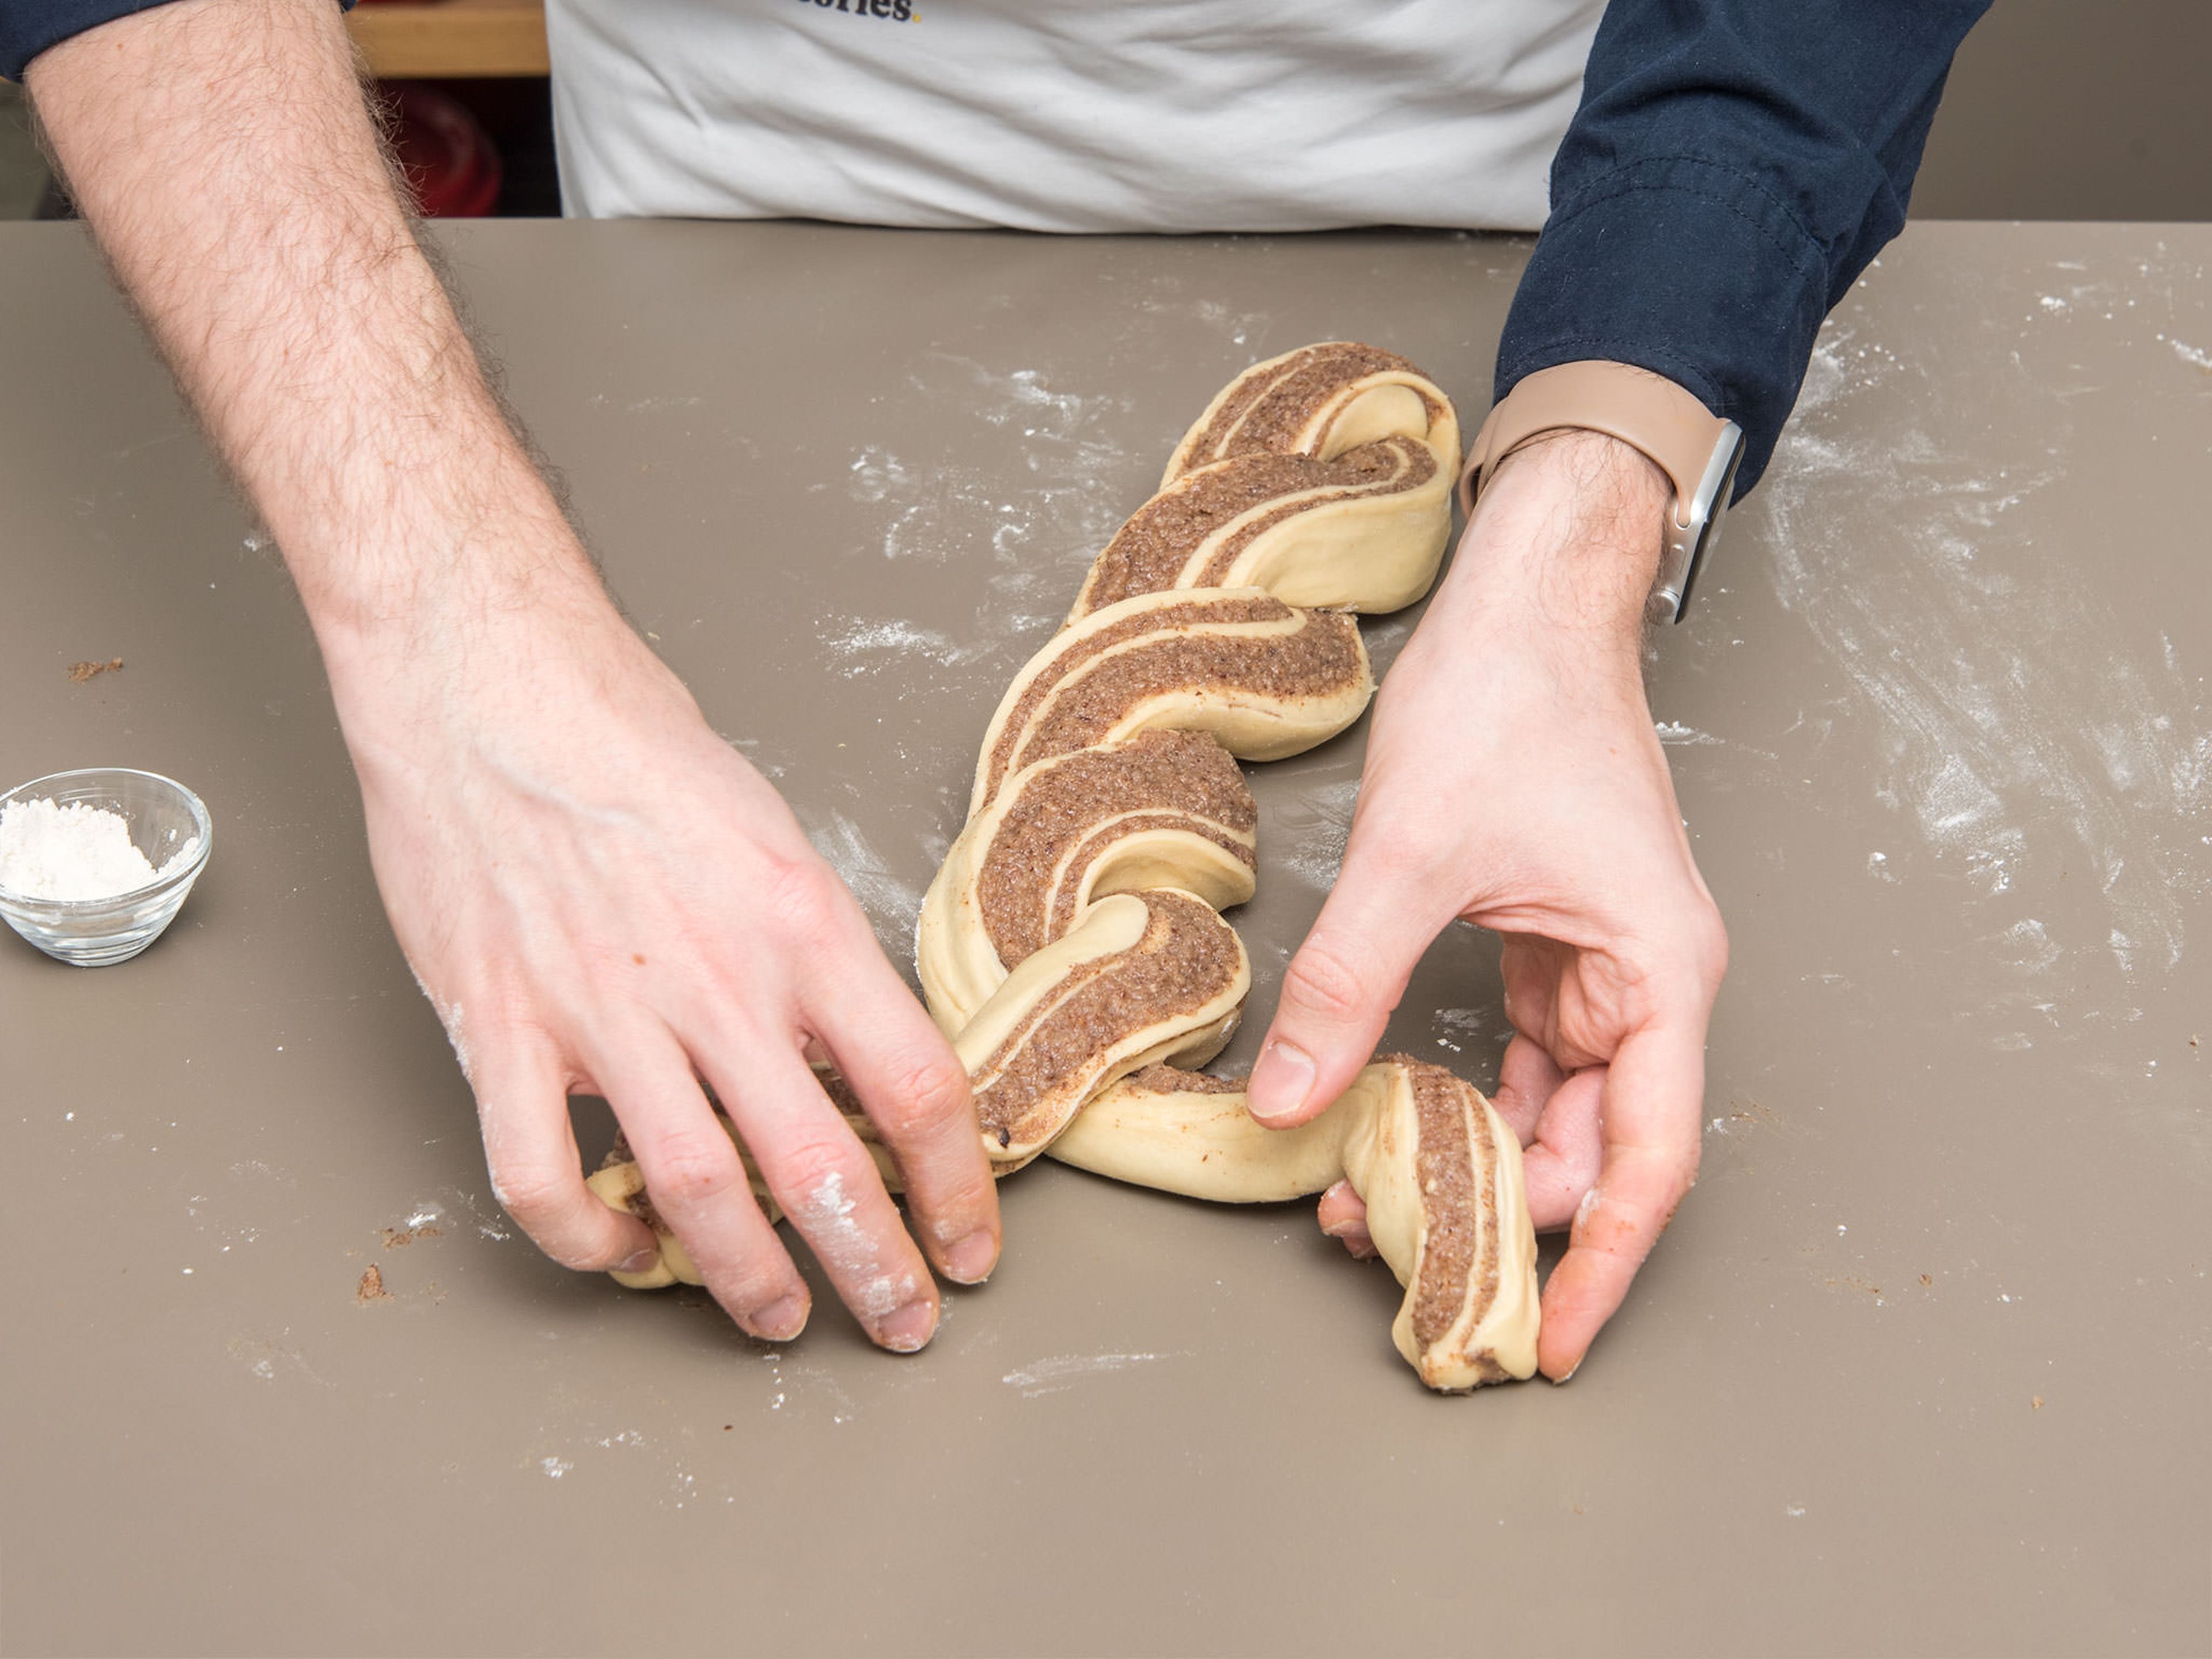 Roll up the dough along the width. Slice the dough along the length in half. Braid the two long logs carefully.